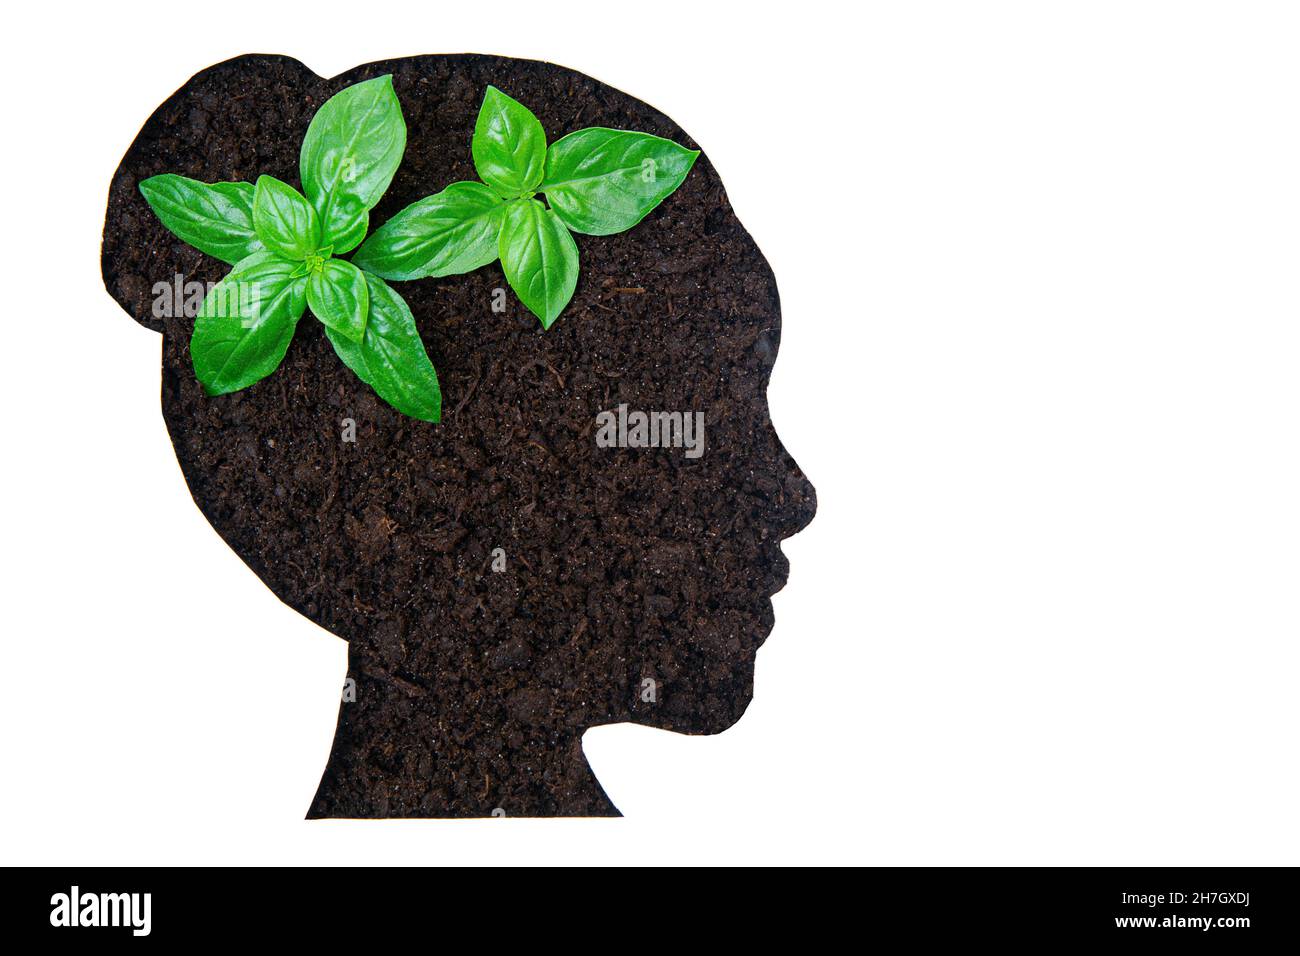 Two young plants in the soil coming through the woman's head shaped paper cut-out. Stock Photo